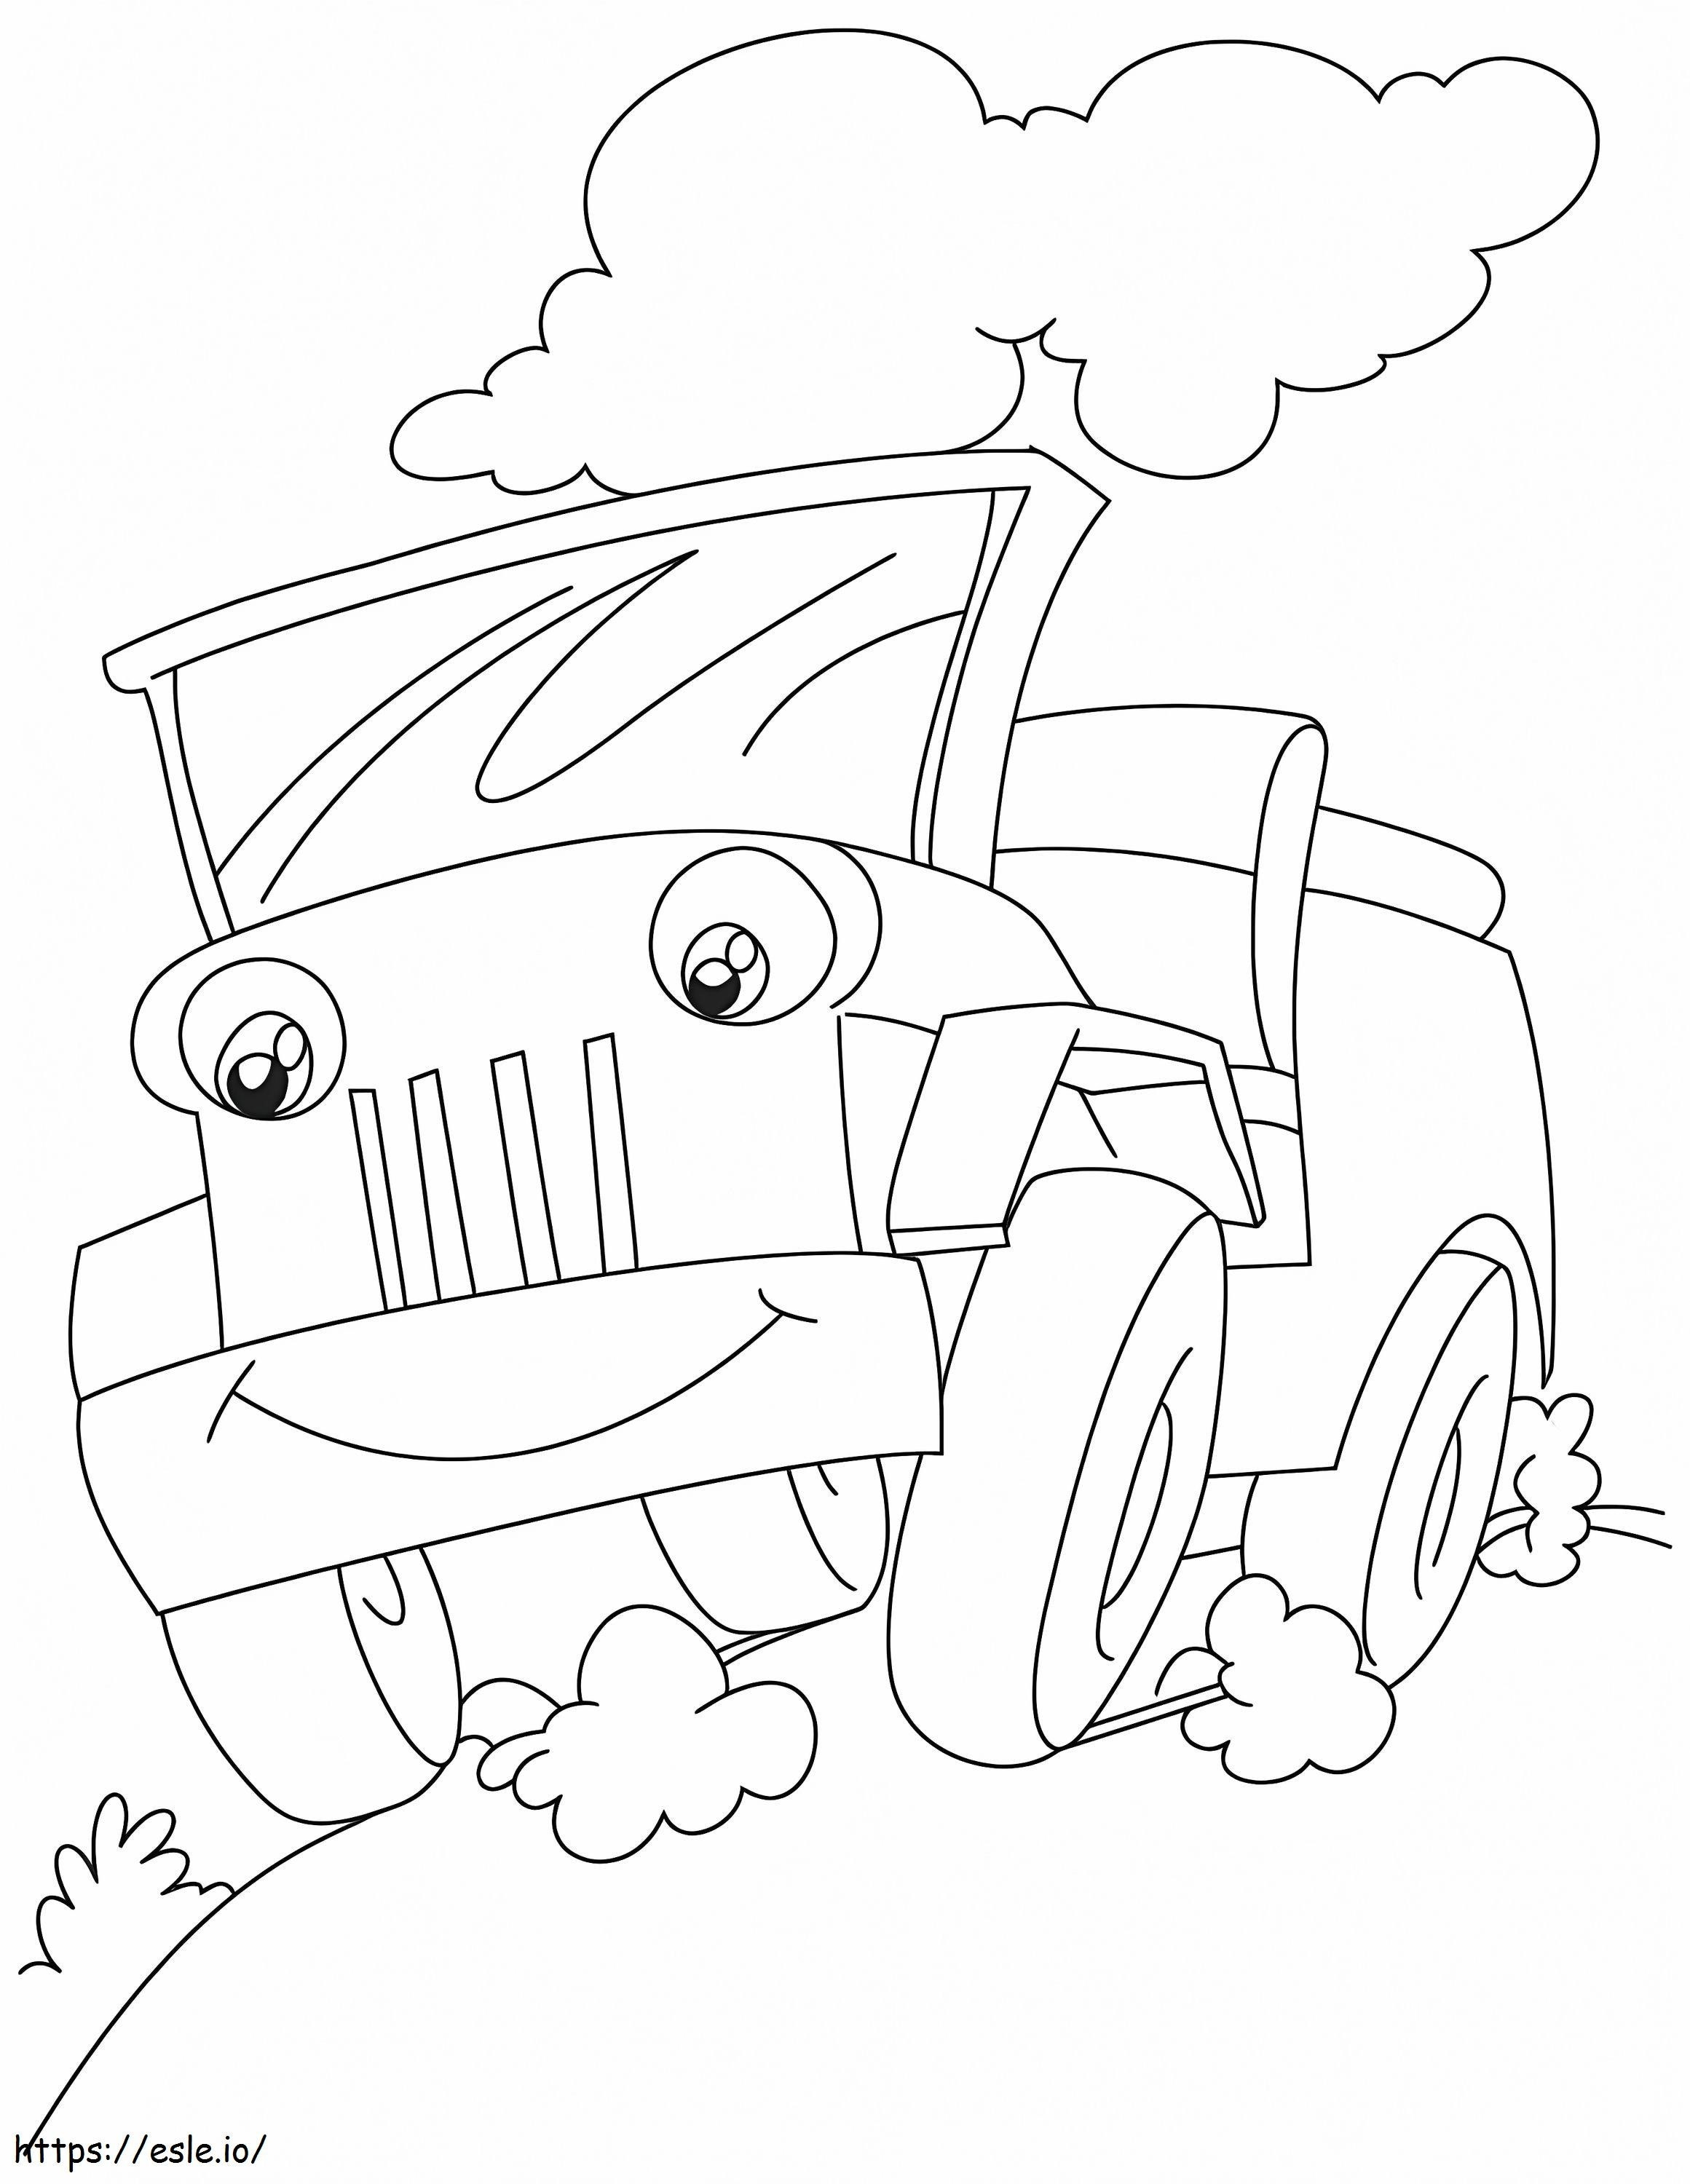 Cute Jeep coloring page